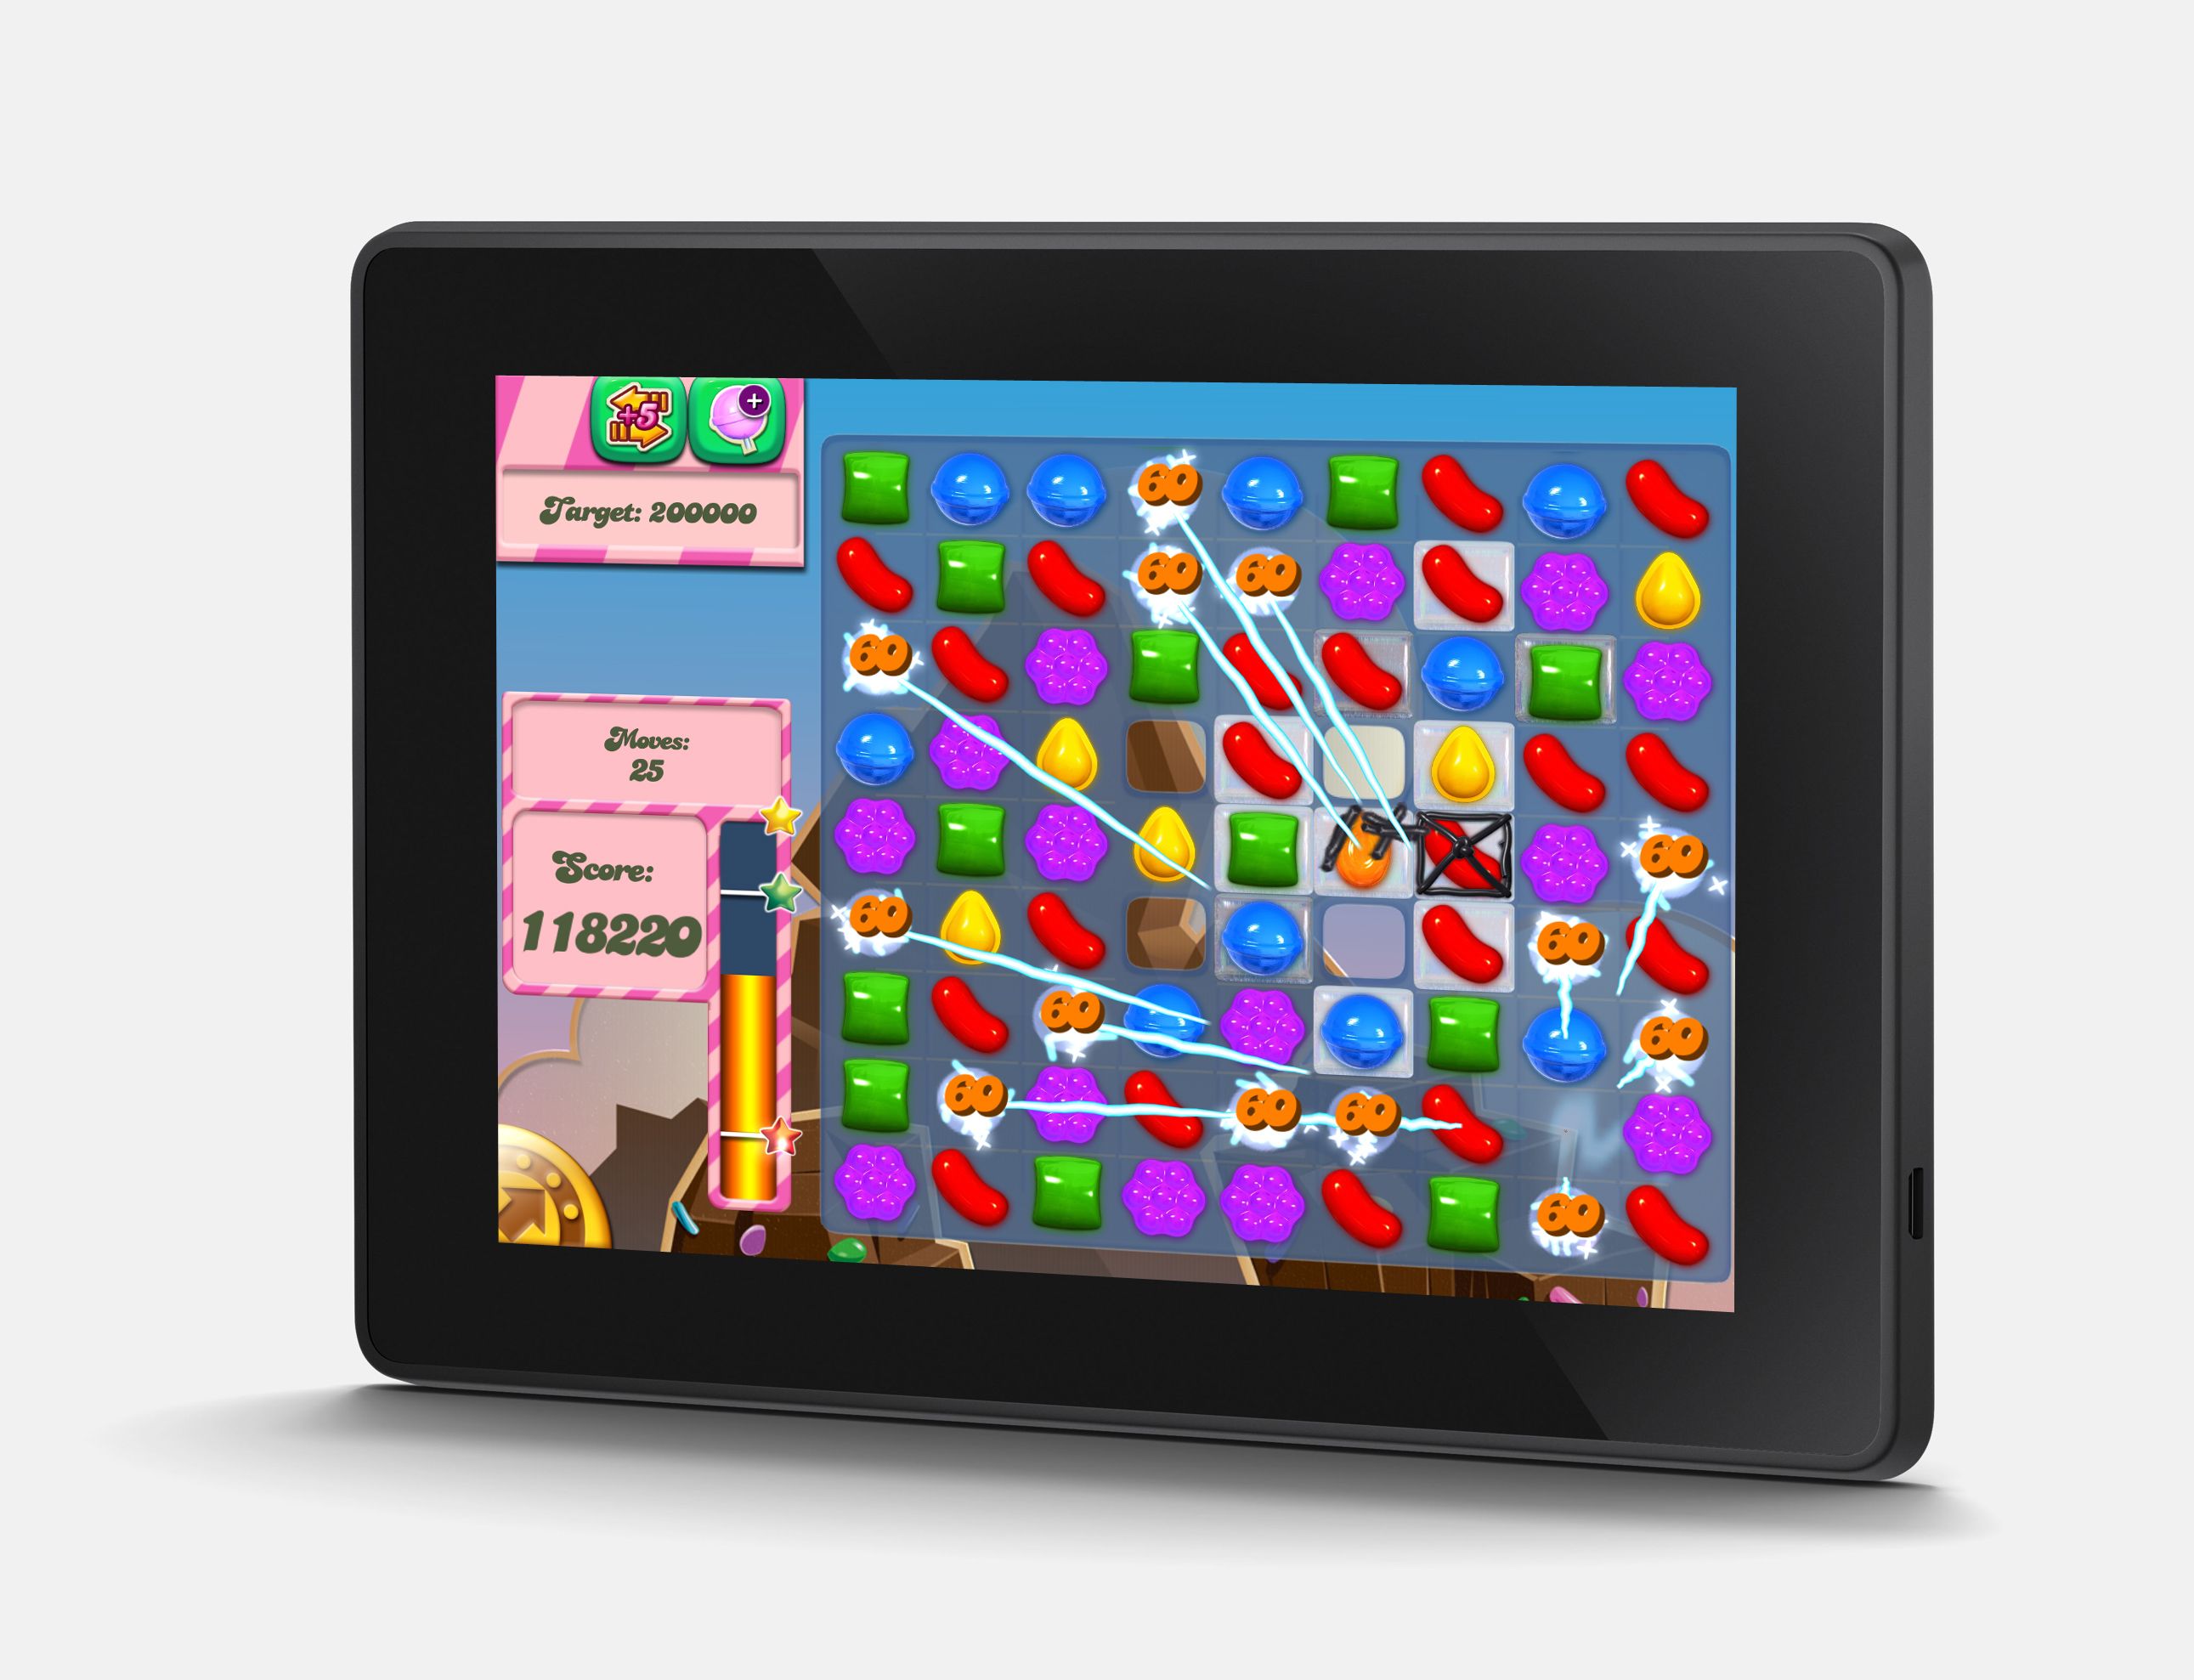 candy crush saga coming to amazon kindle fire tablets this week image 1